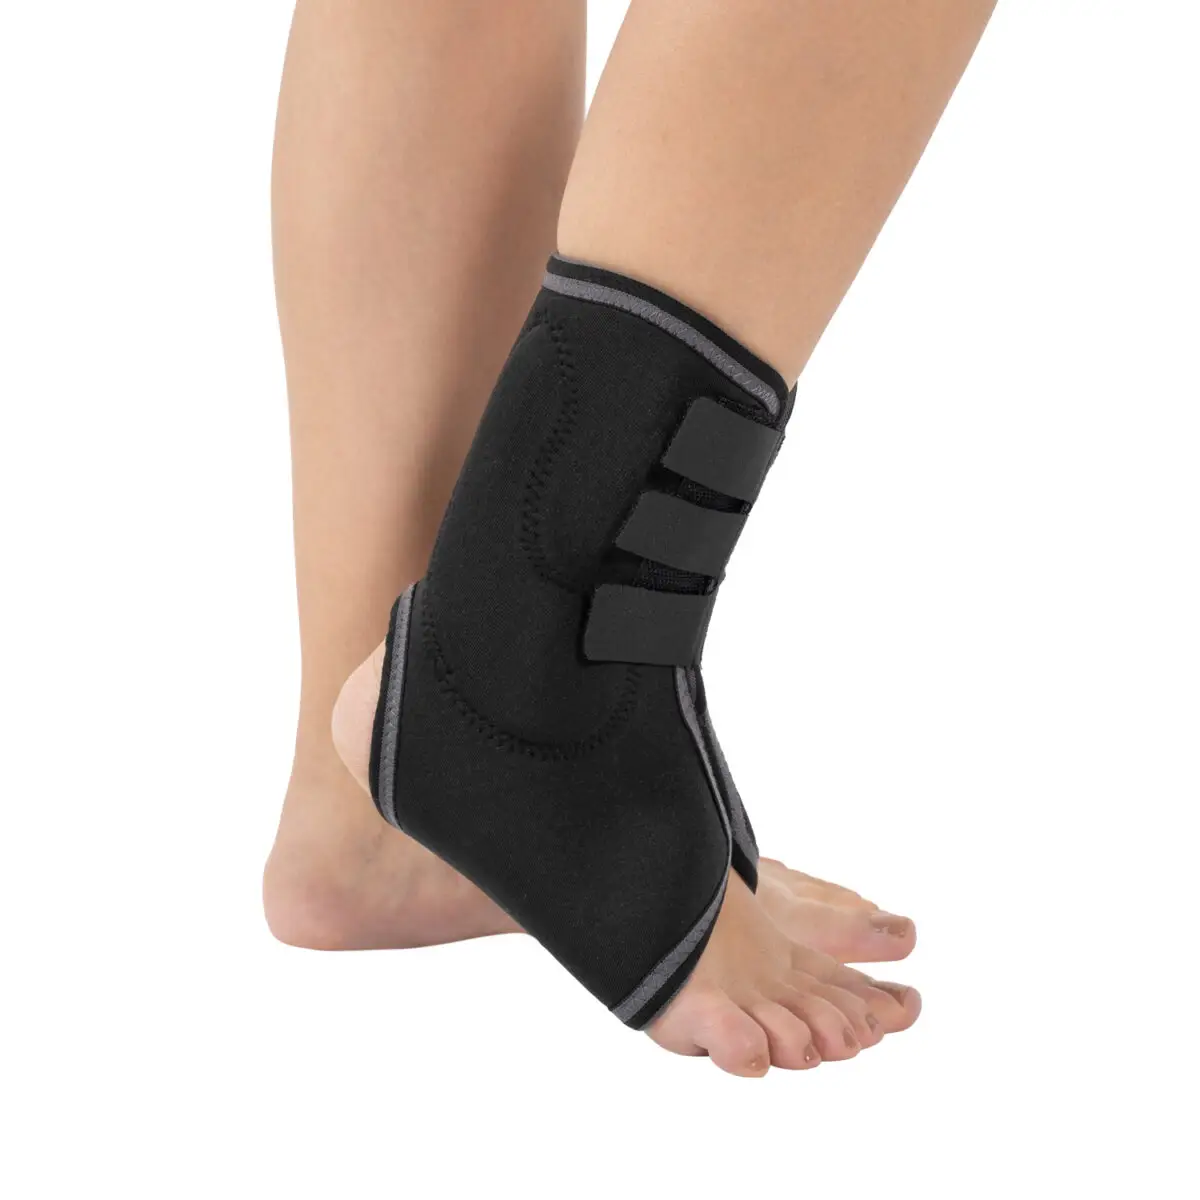 Wundmed ankle protection - size M